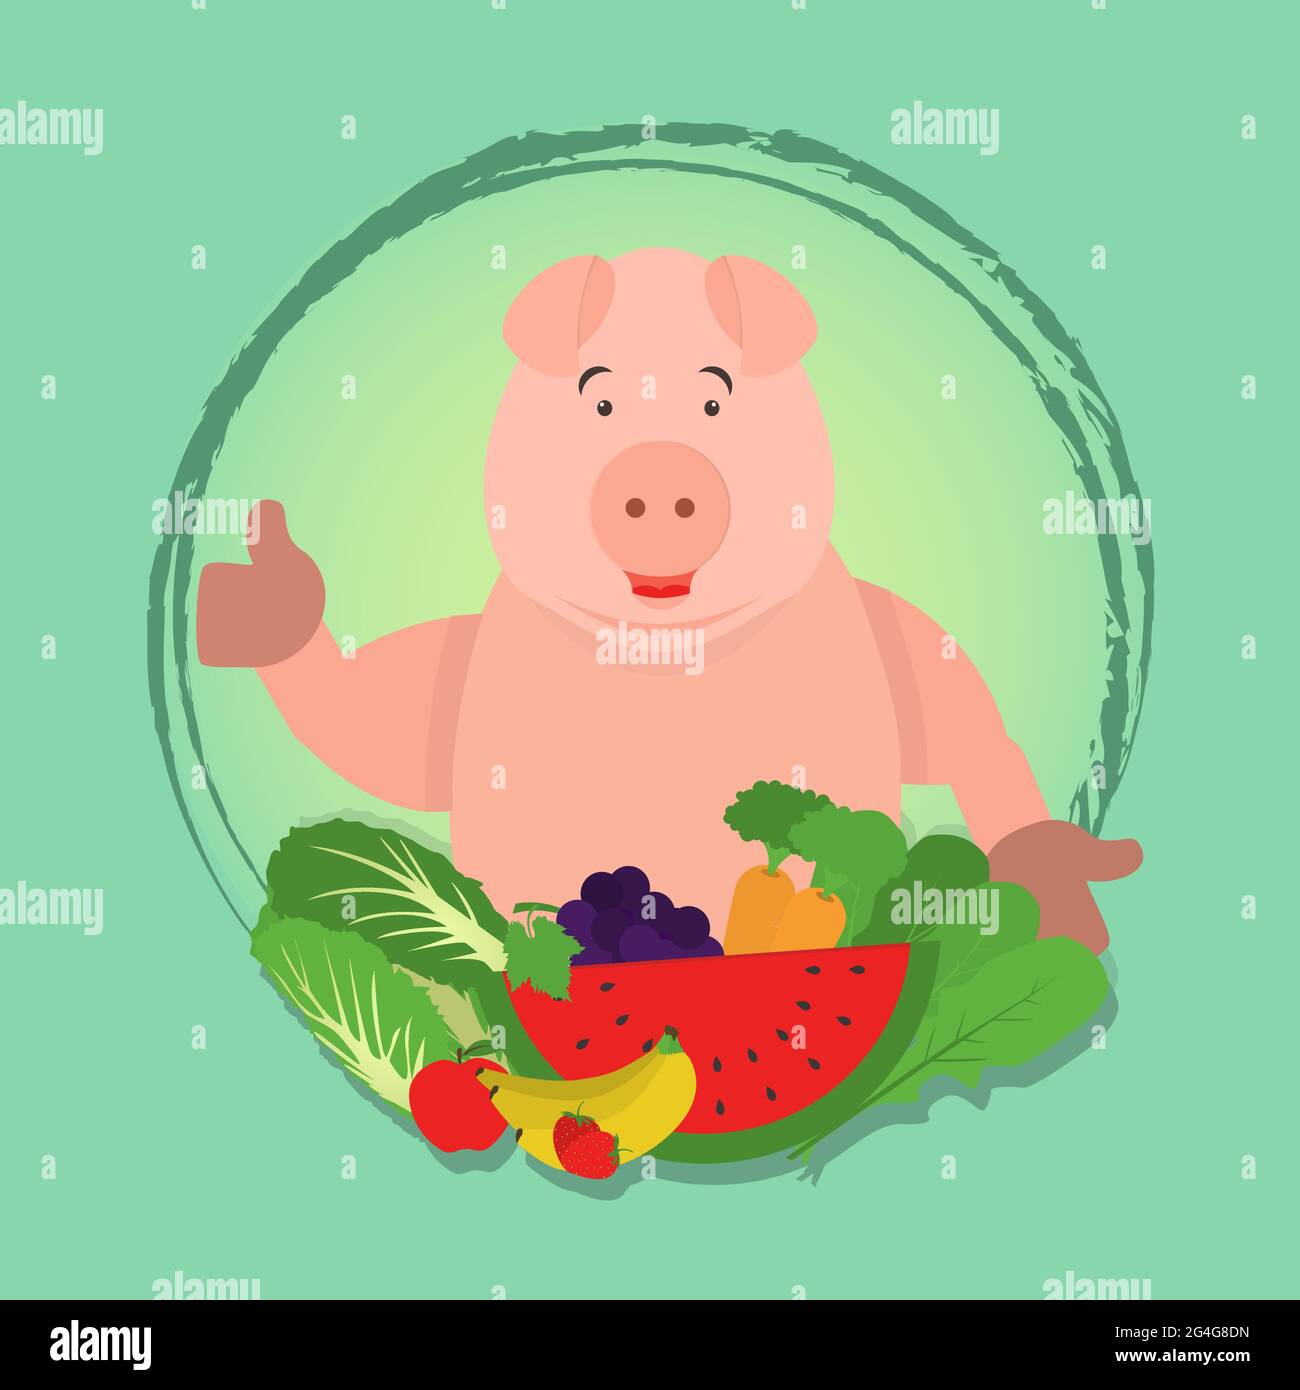 Happy pig presenting vegetables and fruits. Invitation to veganism and vegetarianism. Stock Vector